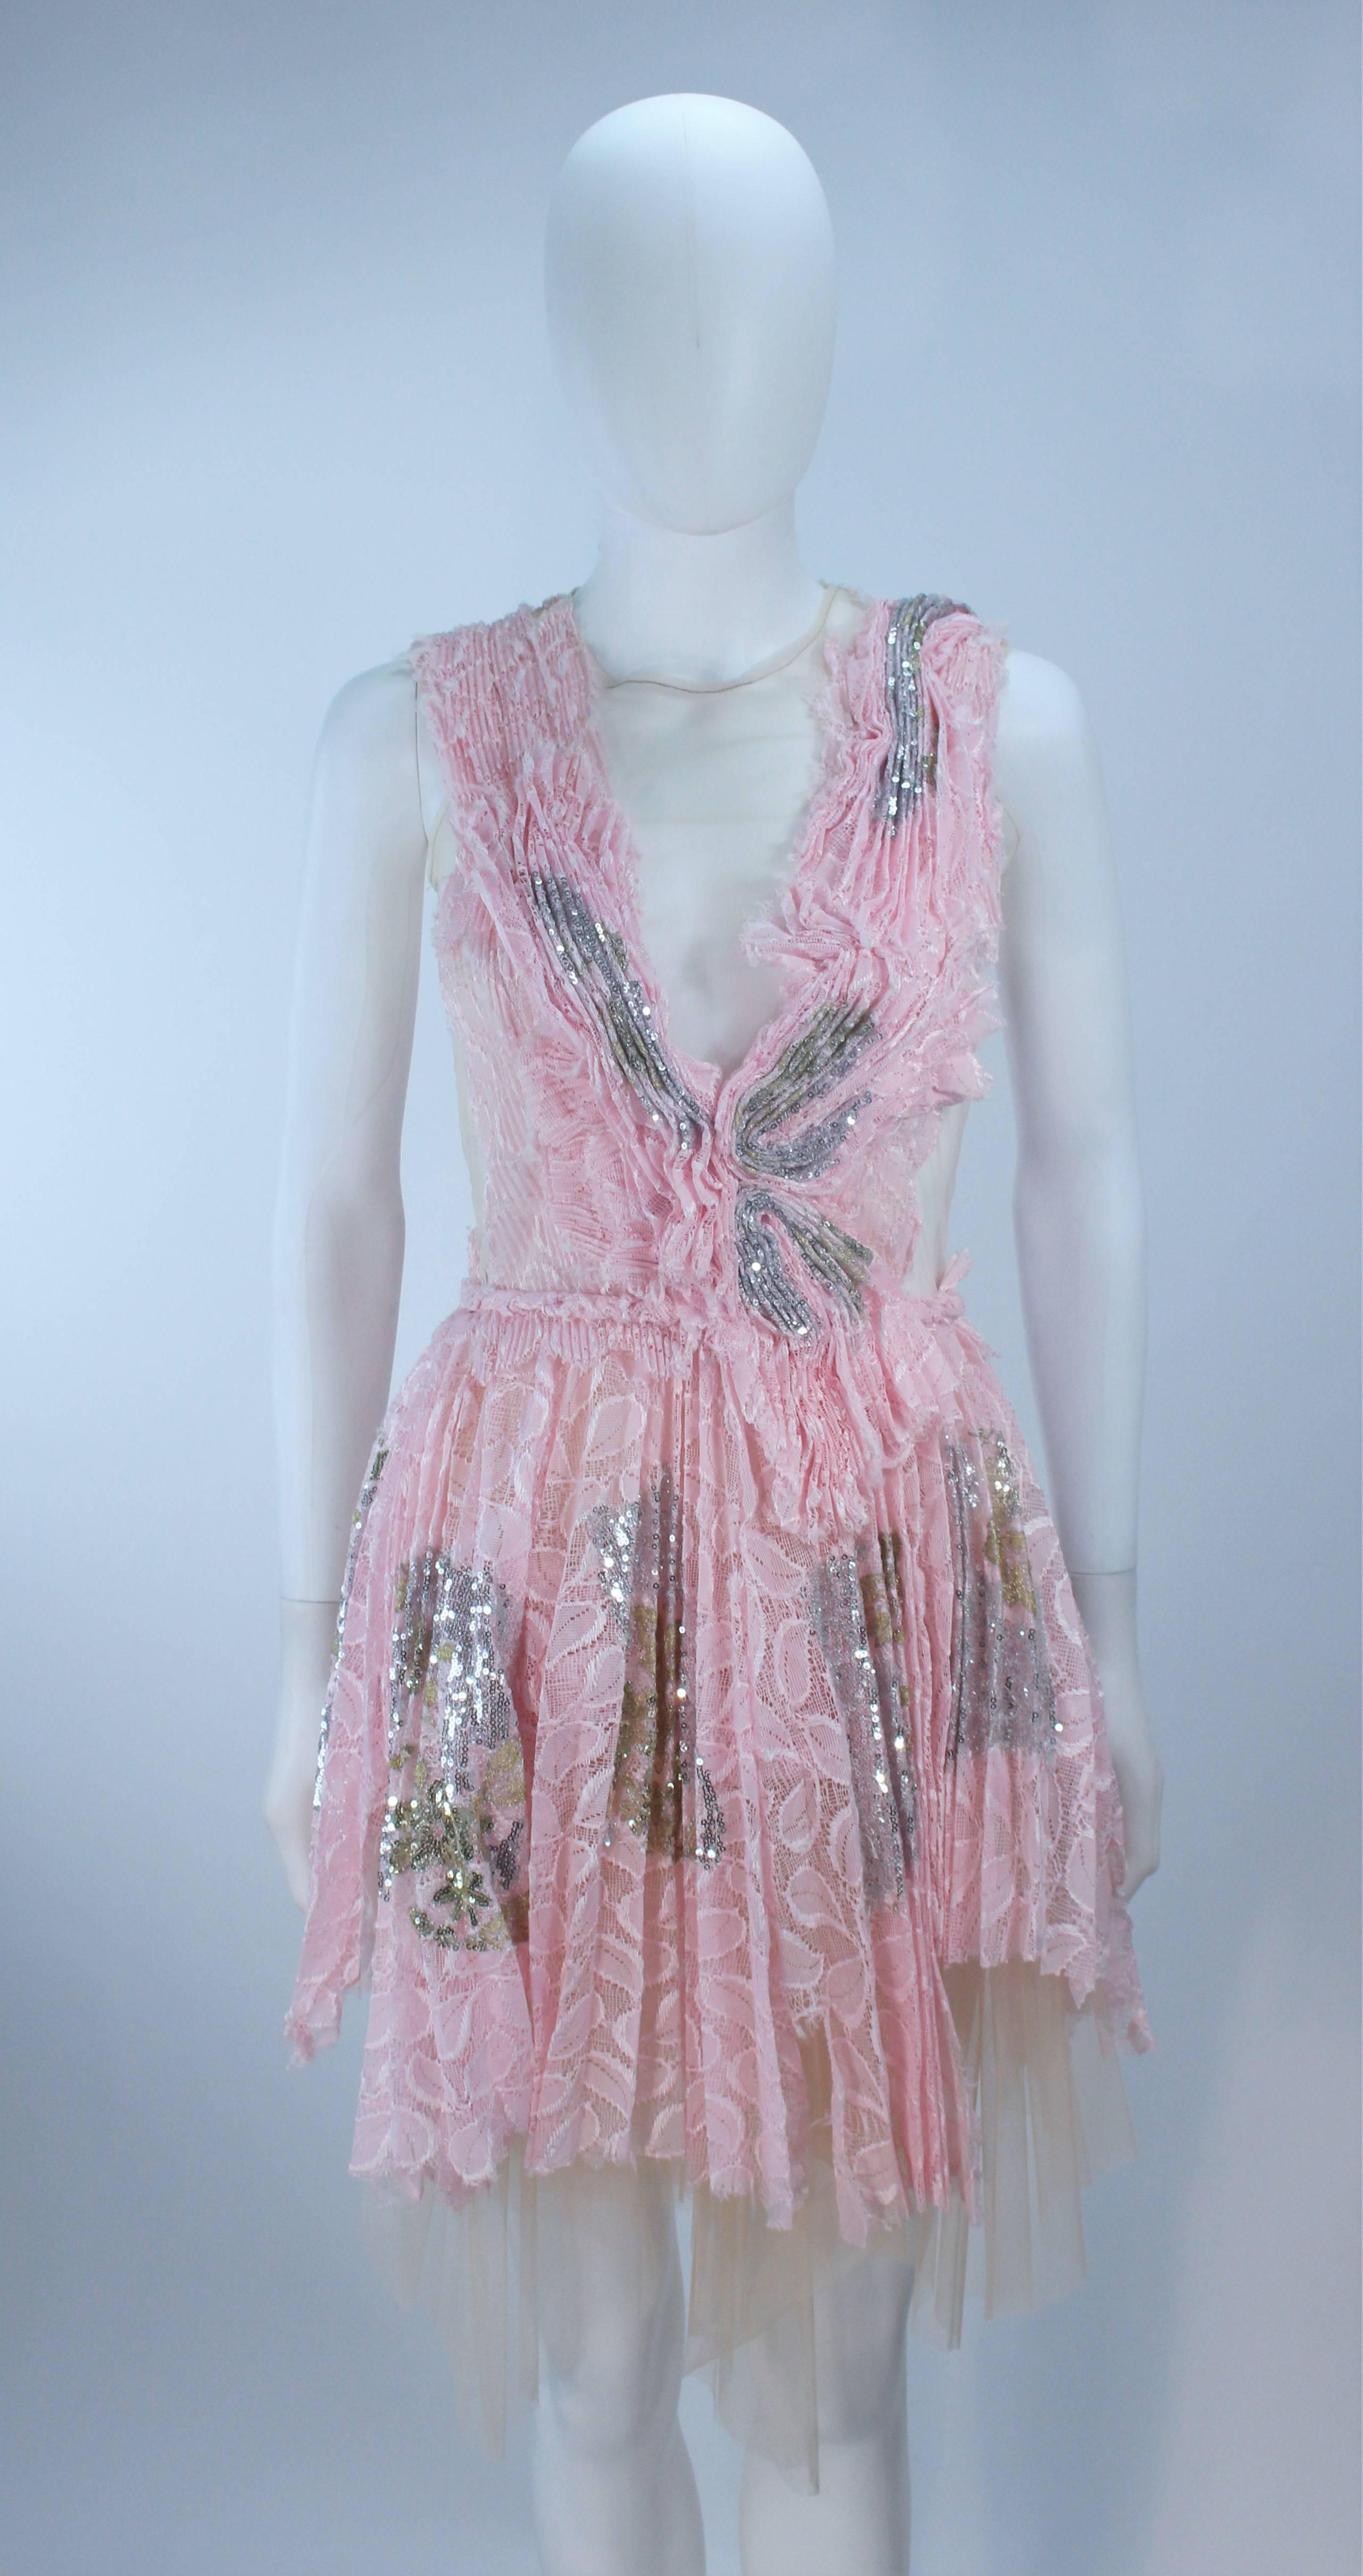 Gray MORALES Sheer Pink Applique Cocktail Dress with Sequins Size 2 For Sale